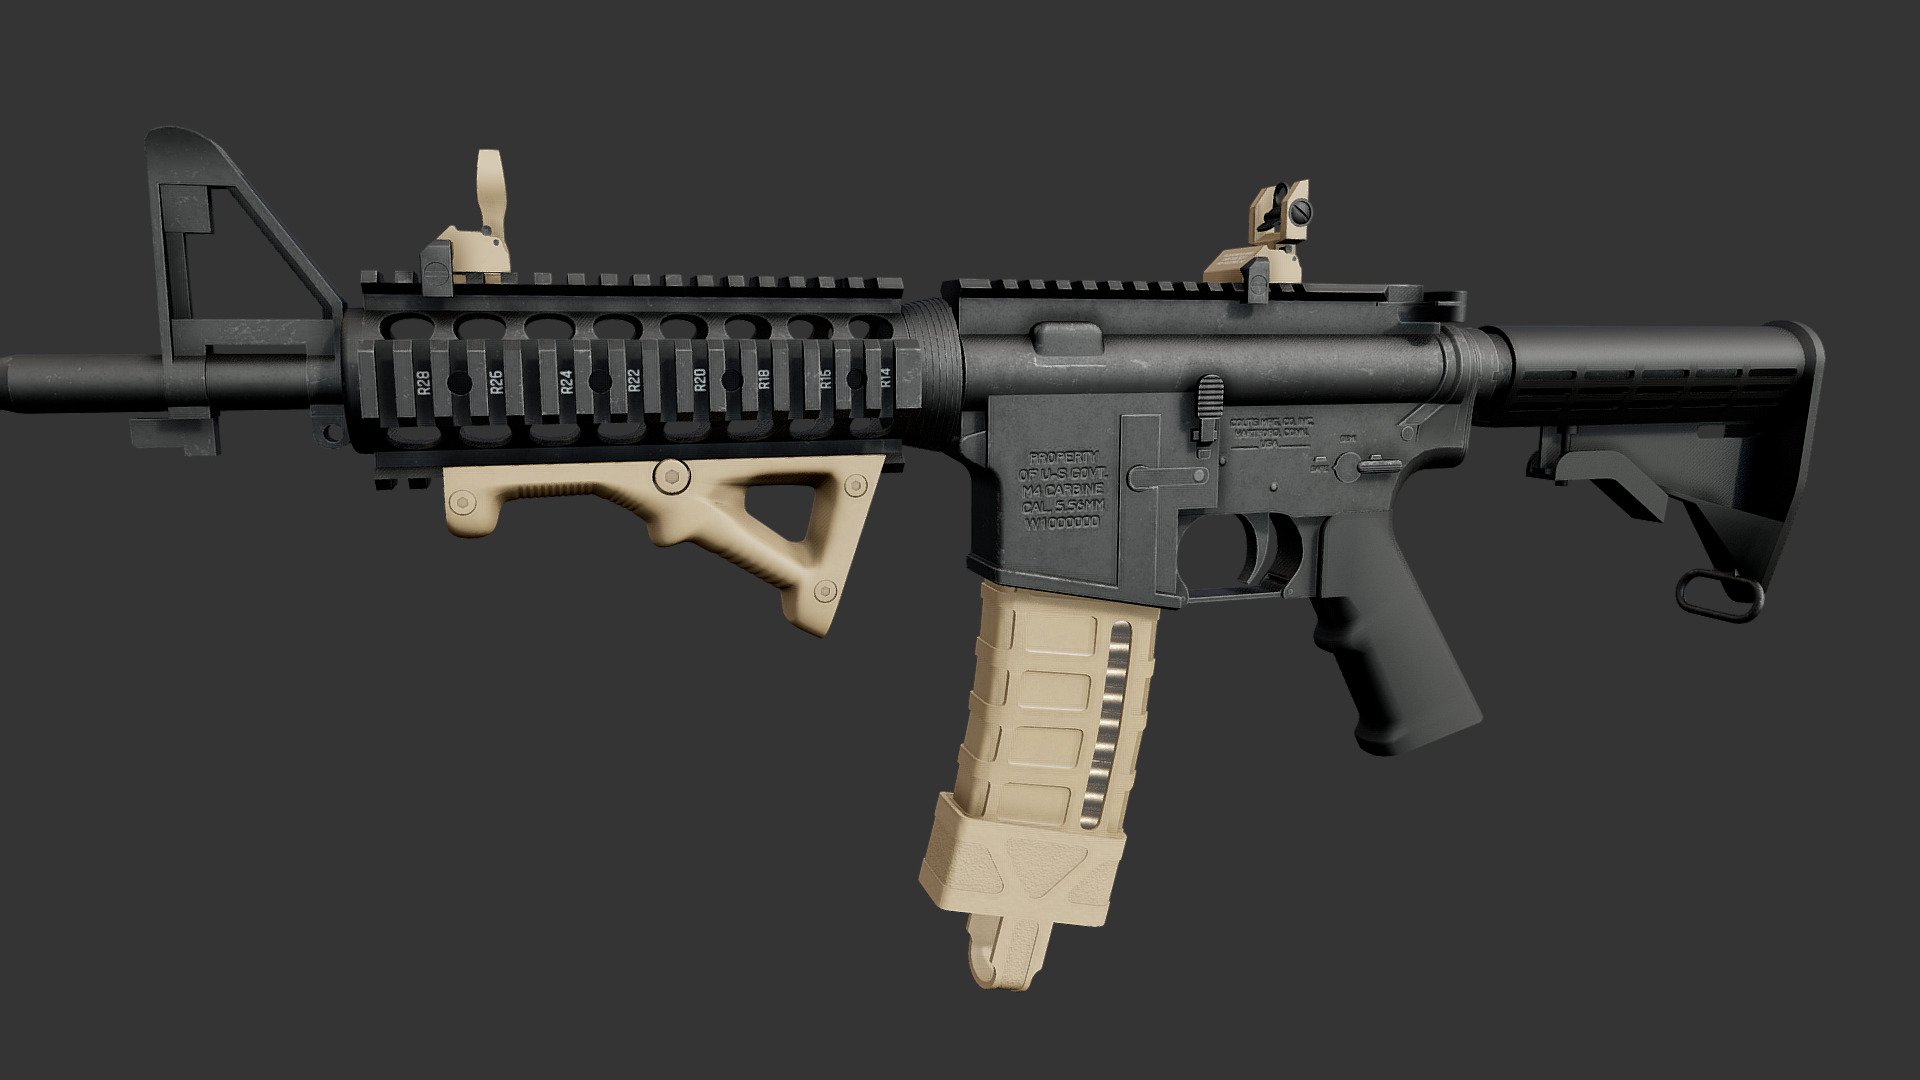 The M4 carbine is a 5.56×45mm NATO, gas-operated, magazine-fed, carbine developed in the United States during the 1980s. It is a shortened version of the M16A2 assault rifle.

The M4 is extensively used by the United States Armed Forces, with decisions to largely replace the M16 rifle in United States Army (starting 2010) and United States Marine Corps (USMC) (starting 2016) combat units as the primary infantry weapon and service rifle. The M4 has been adopted by over 60 countries worldwide, and has been described as “one of the defining firearms of the 21st century” 3d model